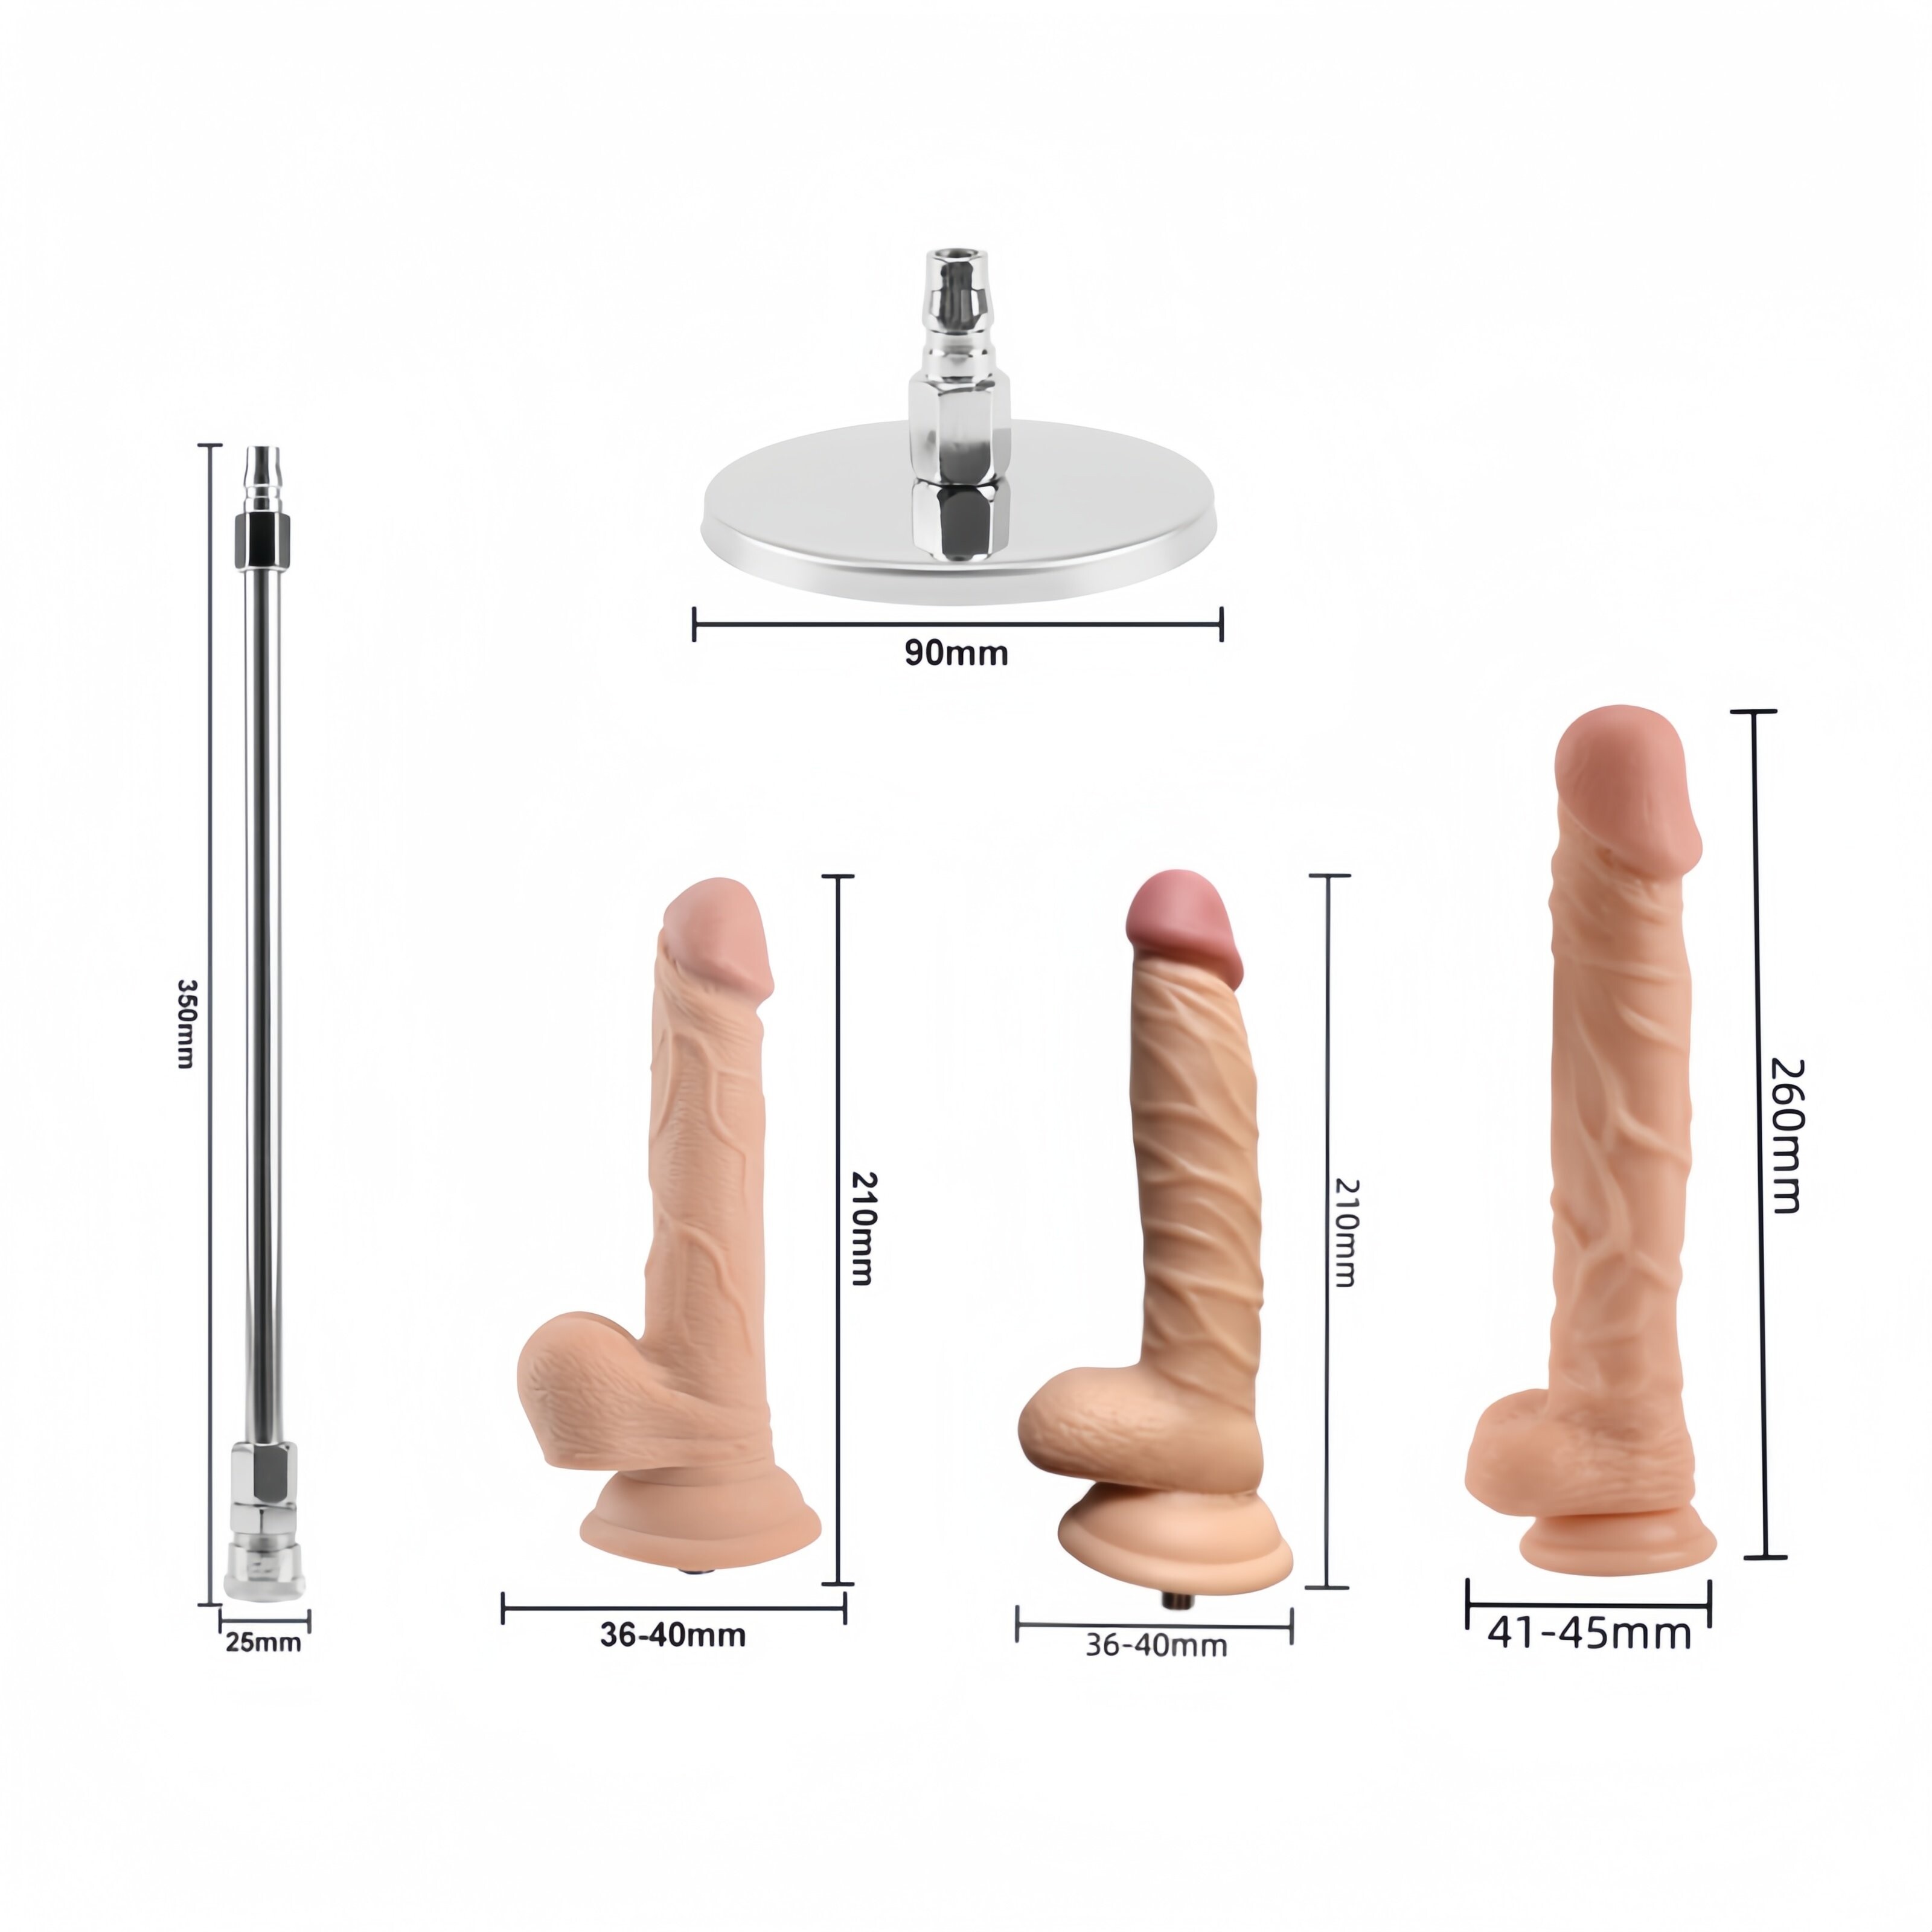 VIDEOS Jessky Sex Machine Powerful Penetration Force and No Noise With 3 PCS Vac-u-Lock Dildo Silver